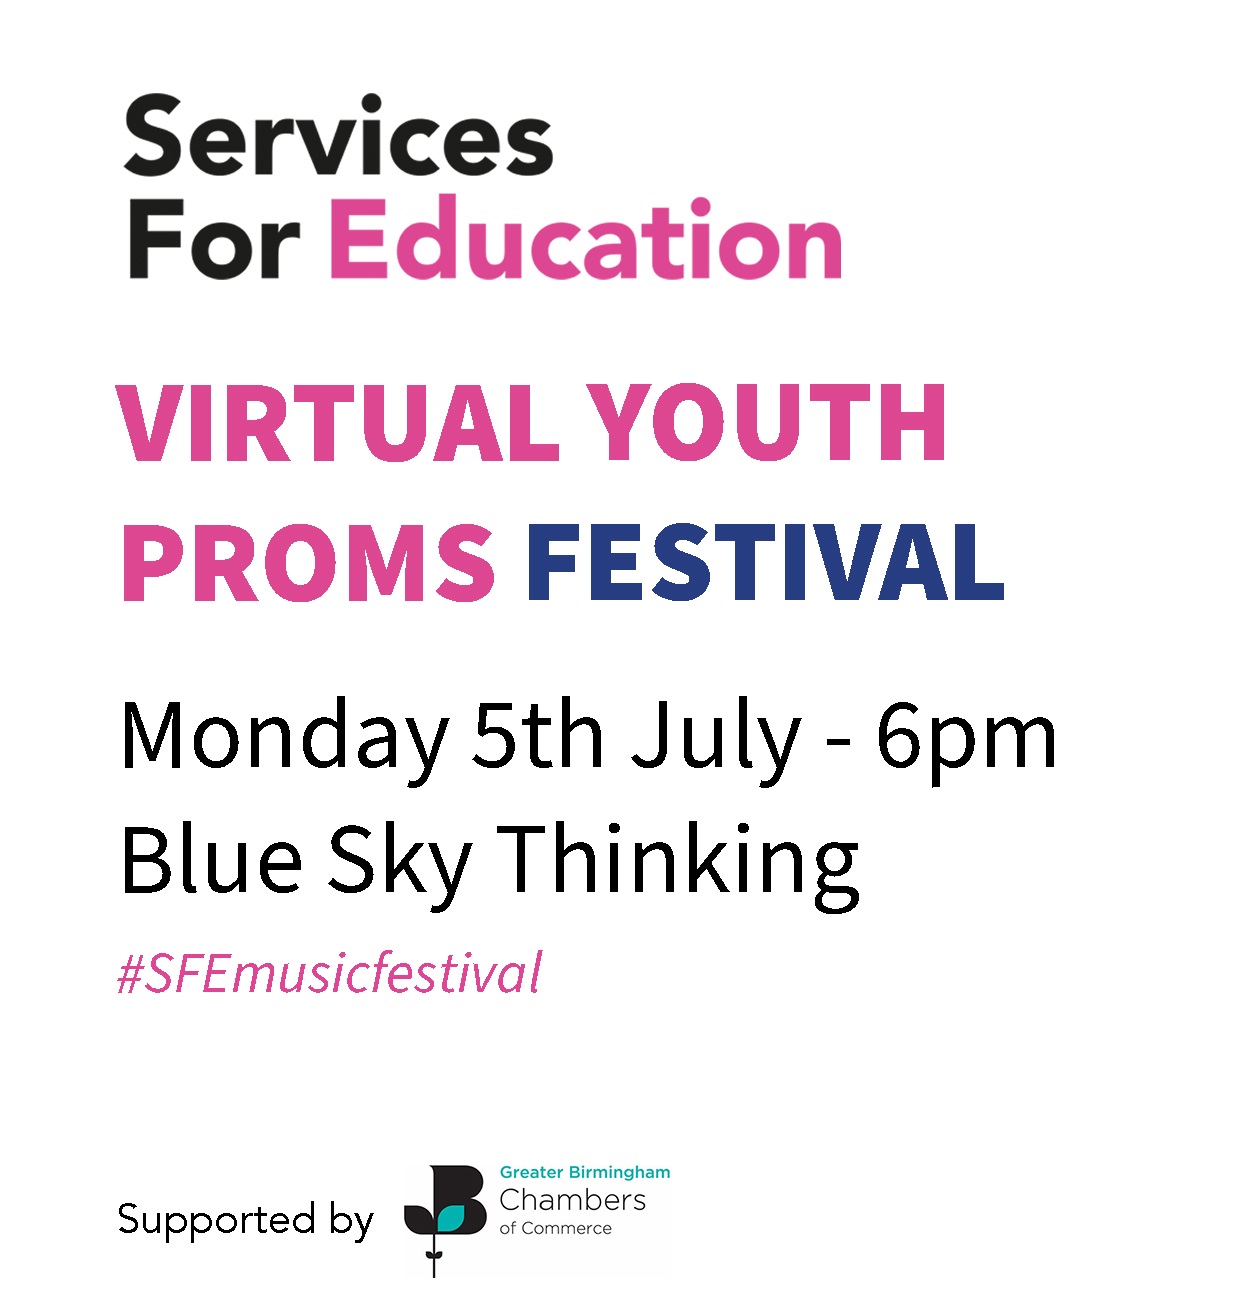 Youth Proms 2021 - services for education ensembles music service 1252 - day 1